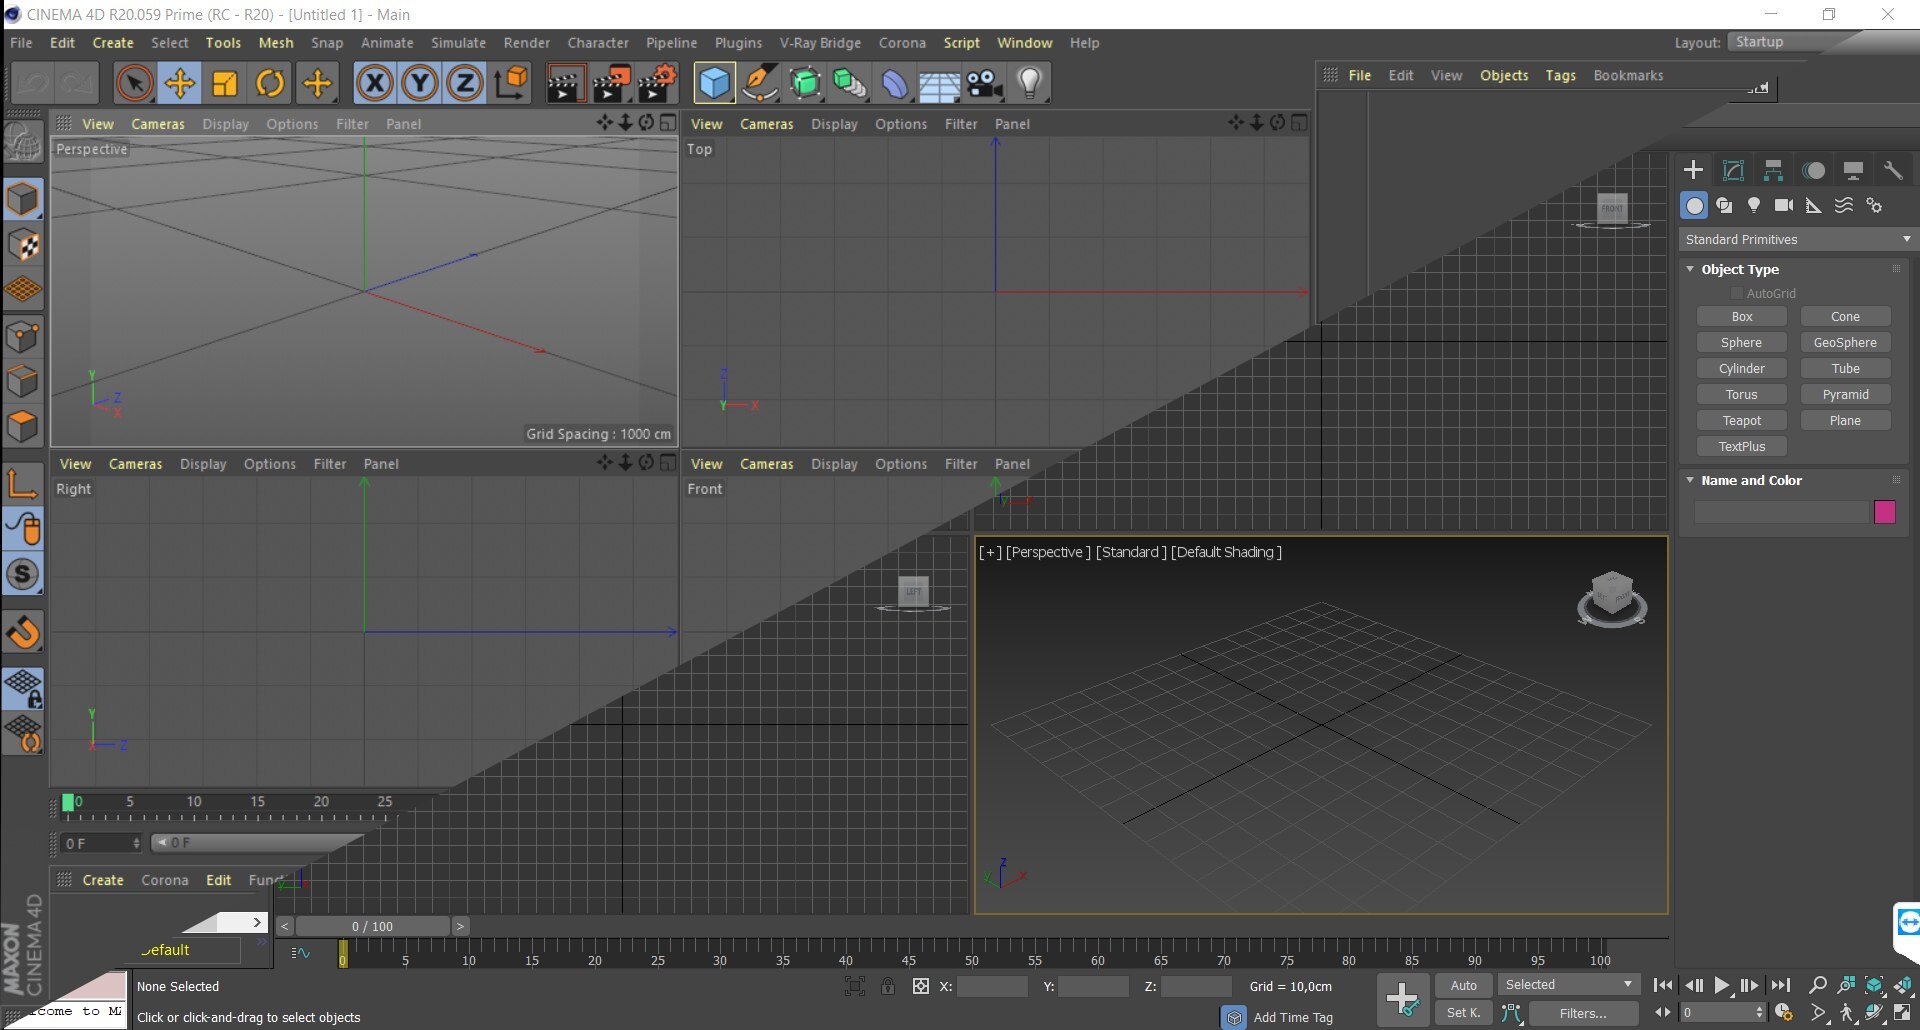 Migrating form 3ds Max to Cinema 4D in professional arch-vizt - Part 1